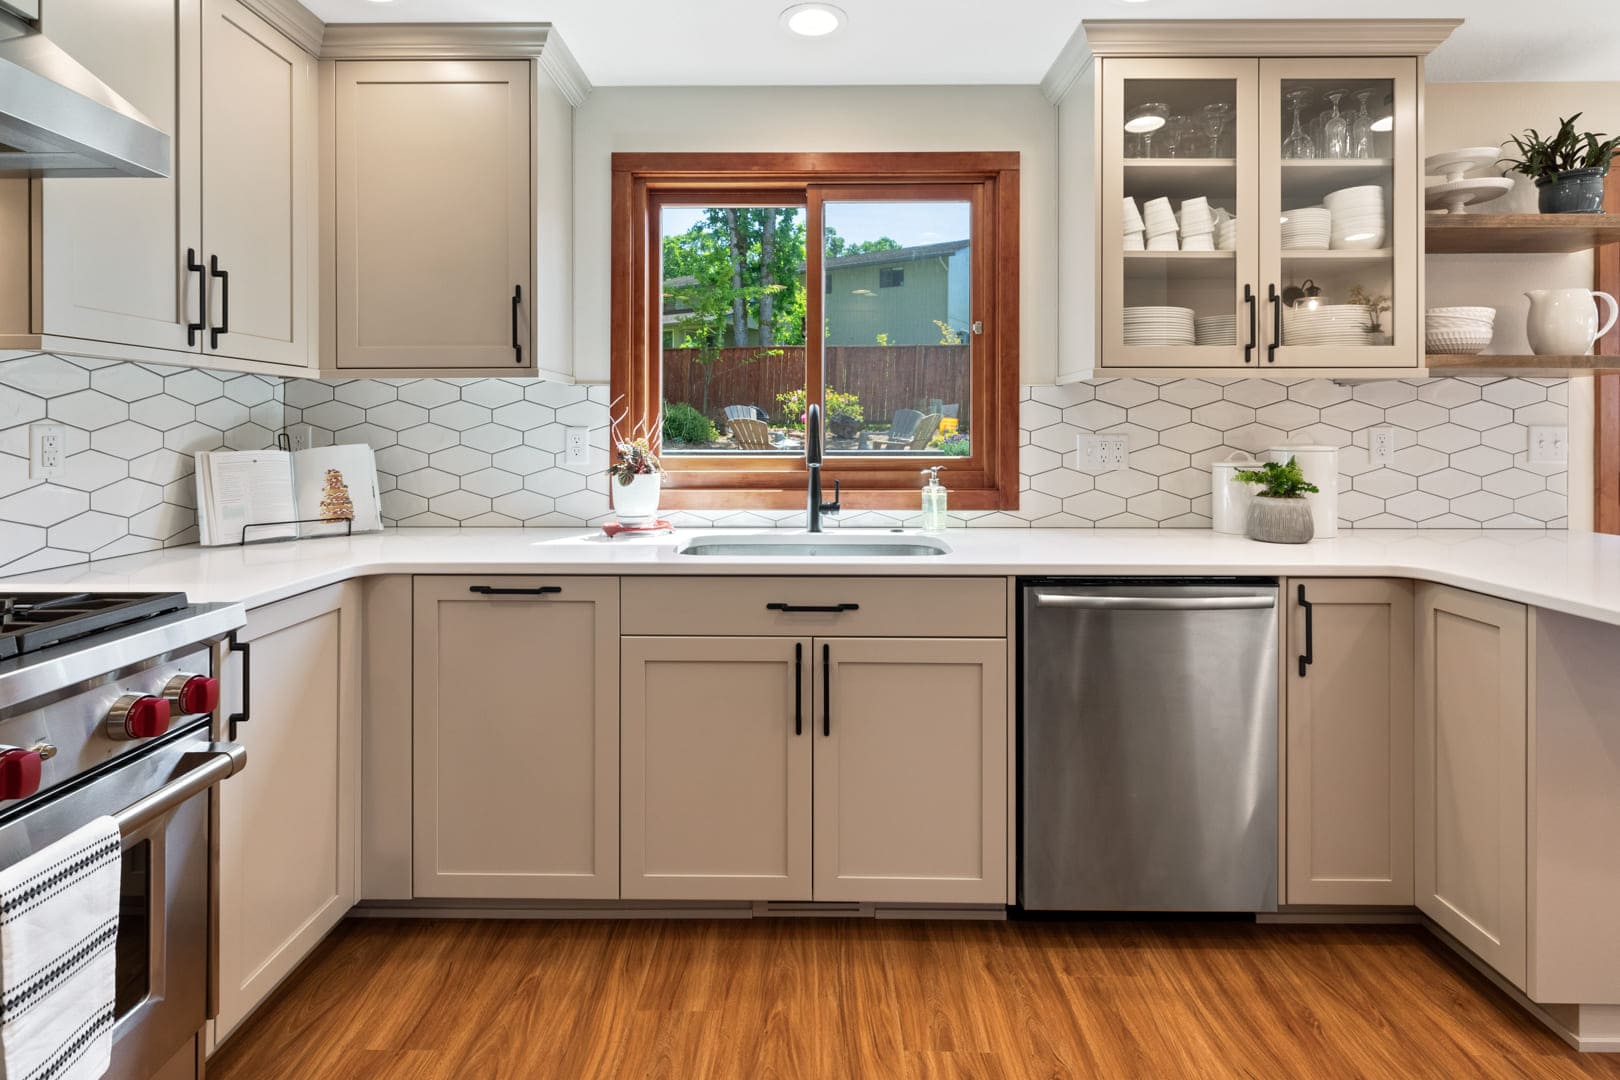 How to Choose Your Corvallis Remodeling Design Team